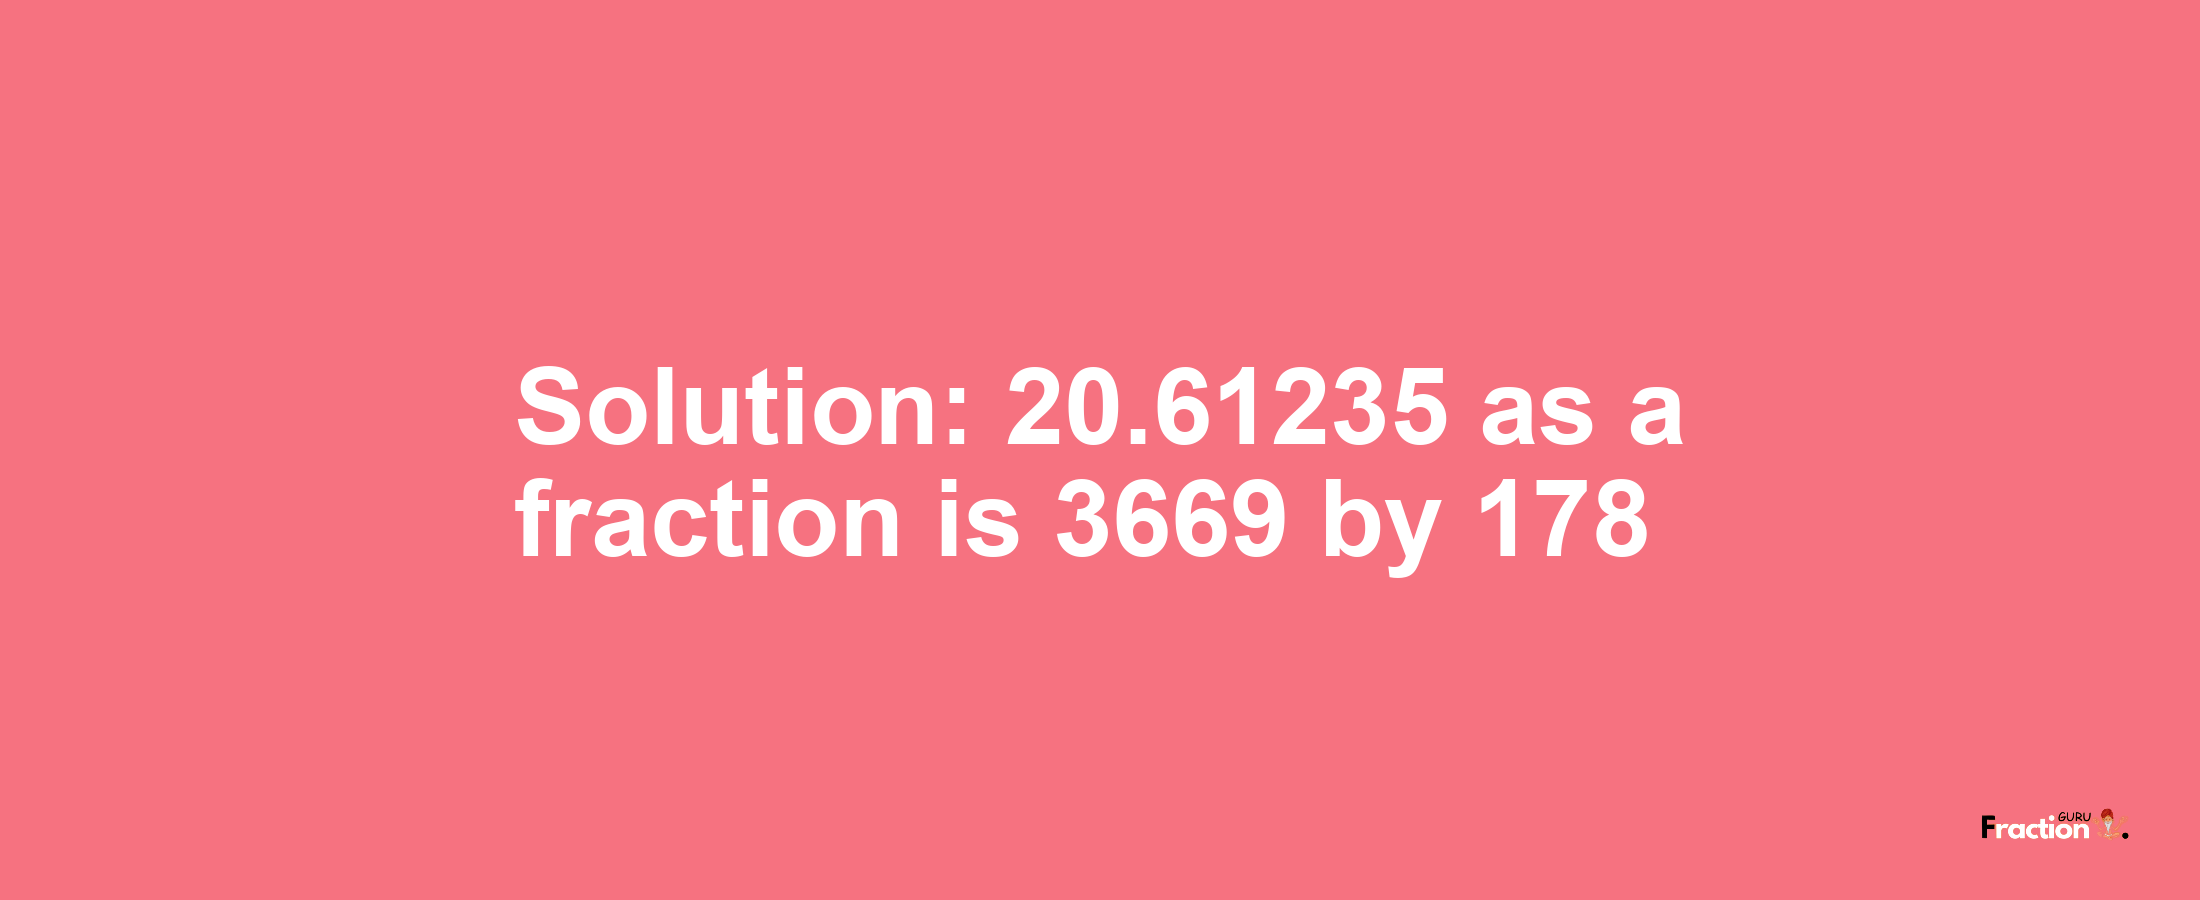 Solution:20.61235 as a fraction is 3669/178